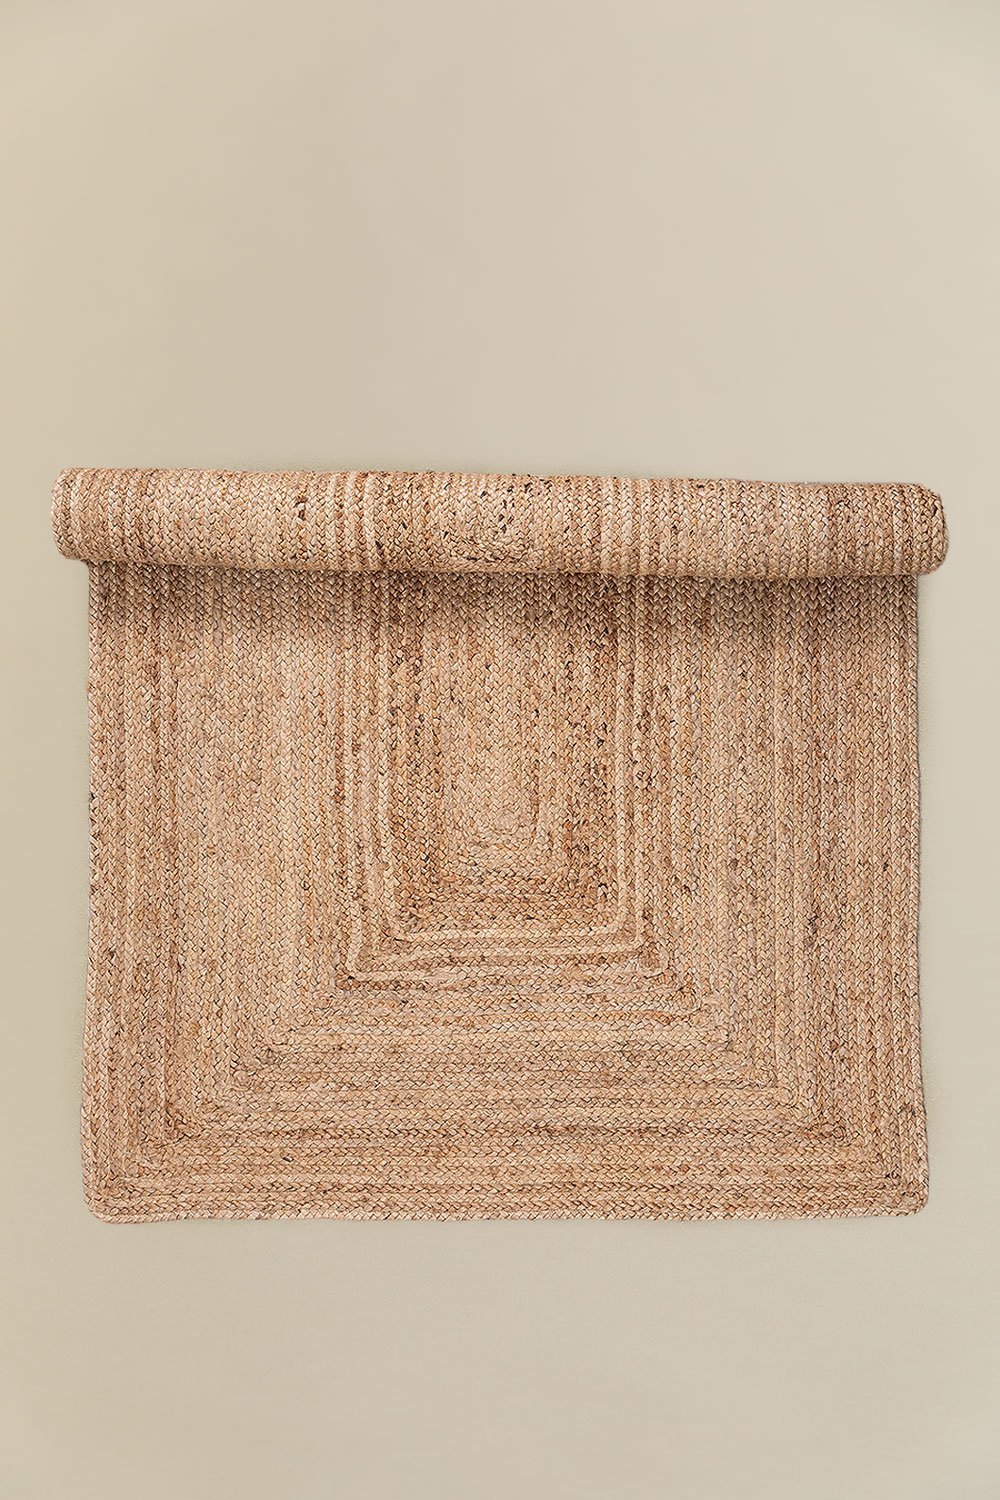 Jute Rug Natural Tempo, gallery image 2